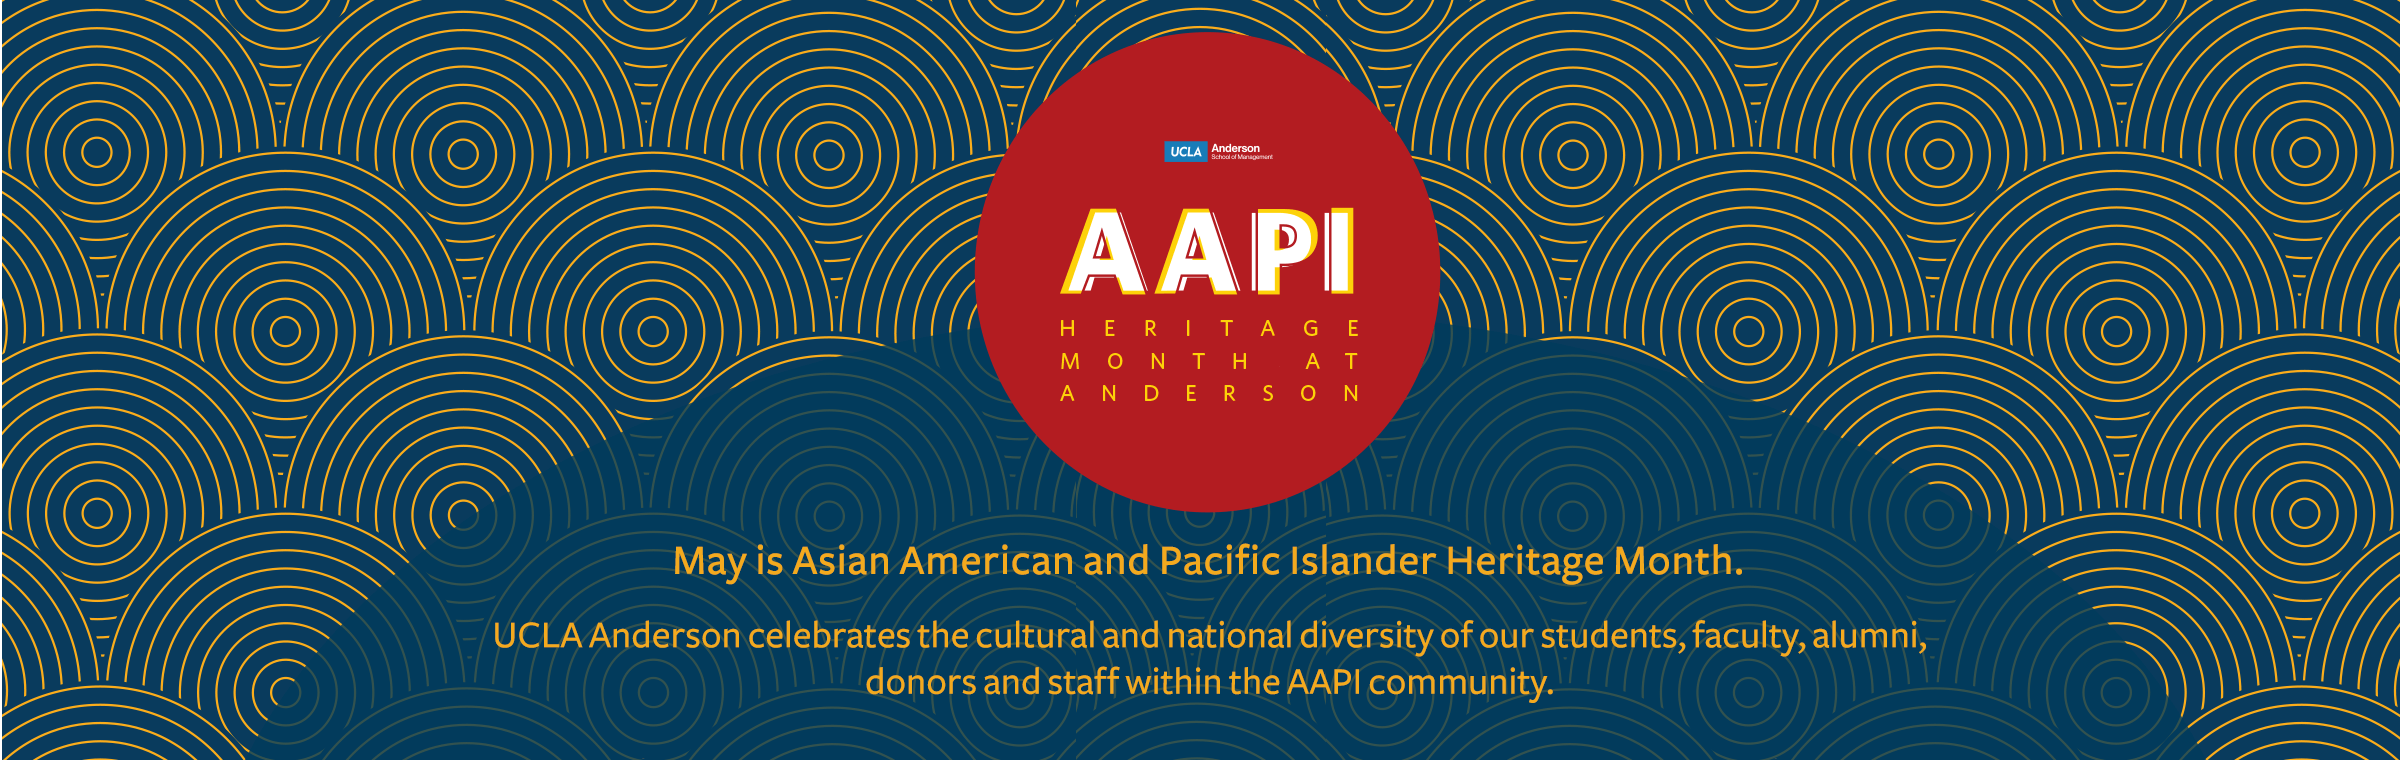 UCLA Anderson celebrates the cultural and national diversity of our students, faculty, alumni, donors and staff within the AAPI community